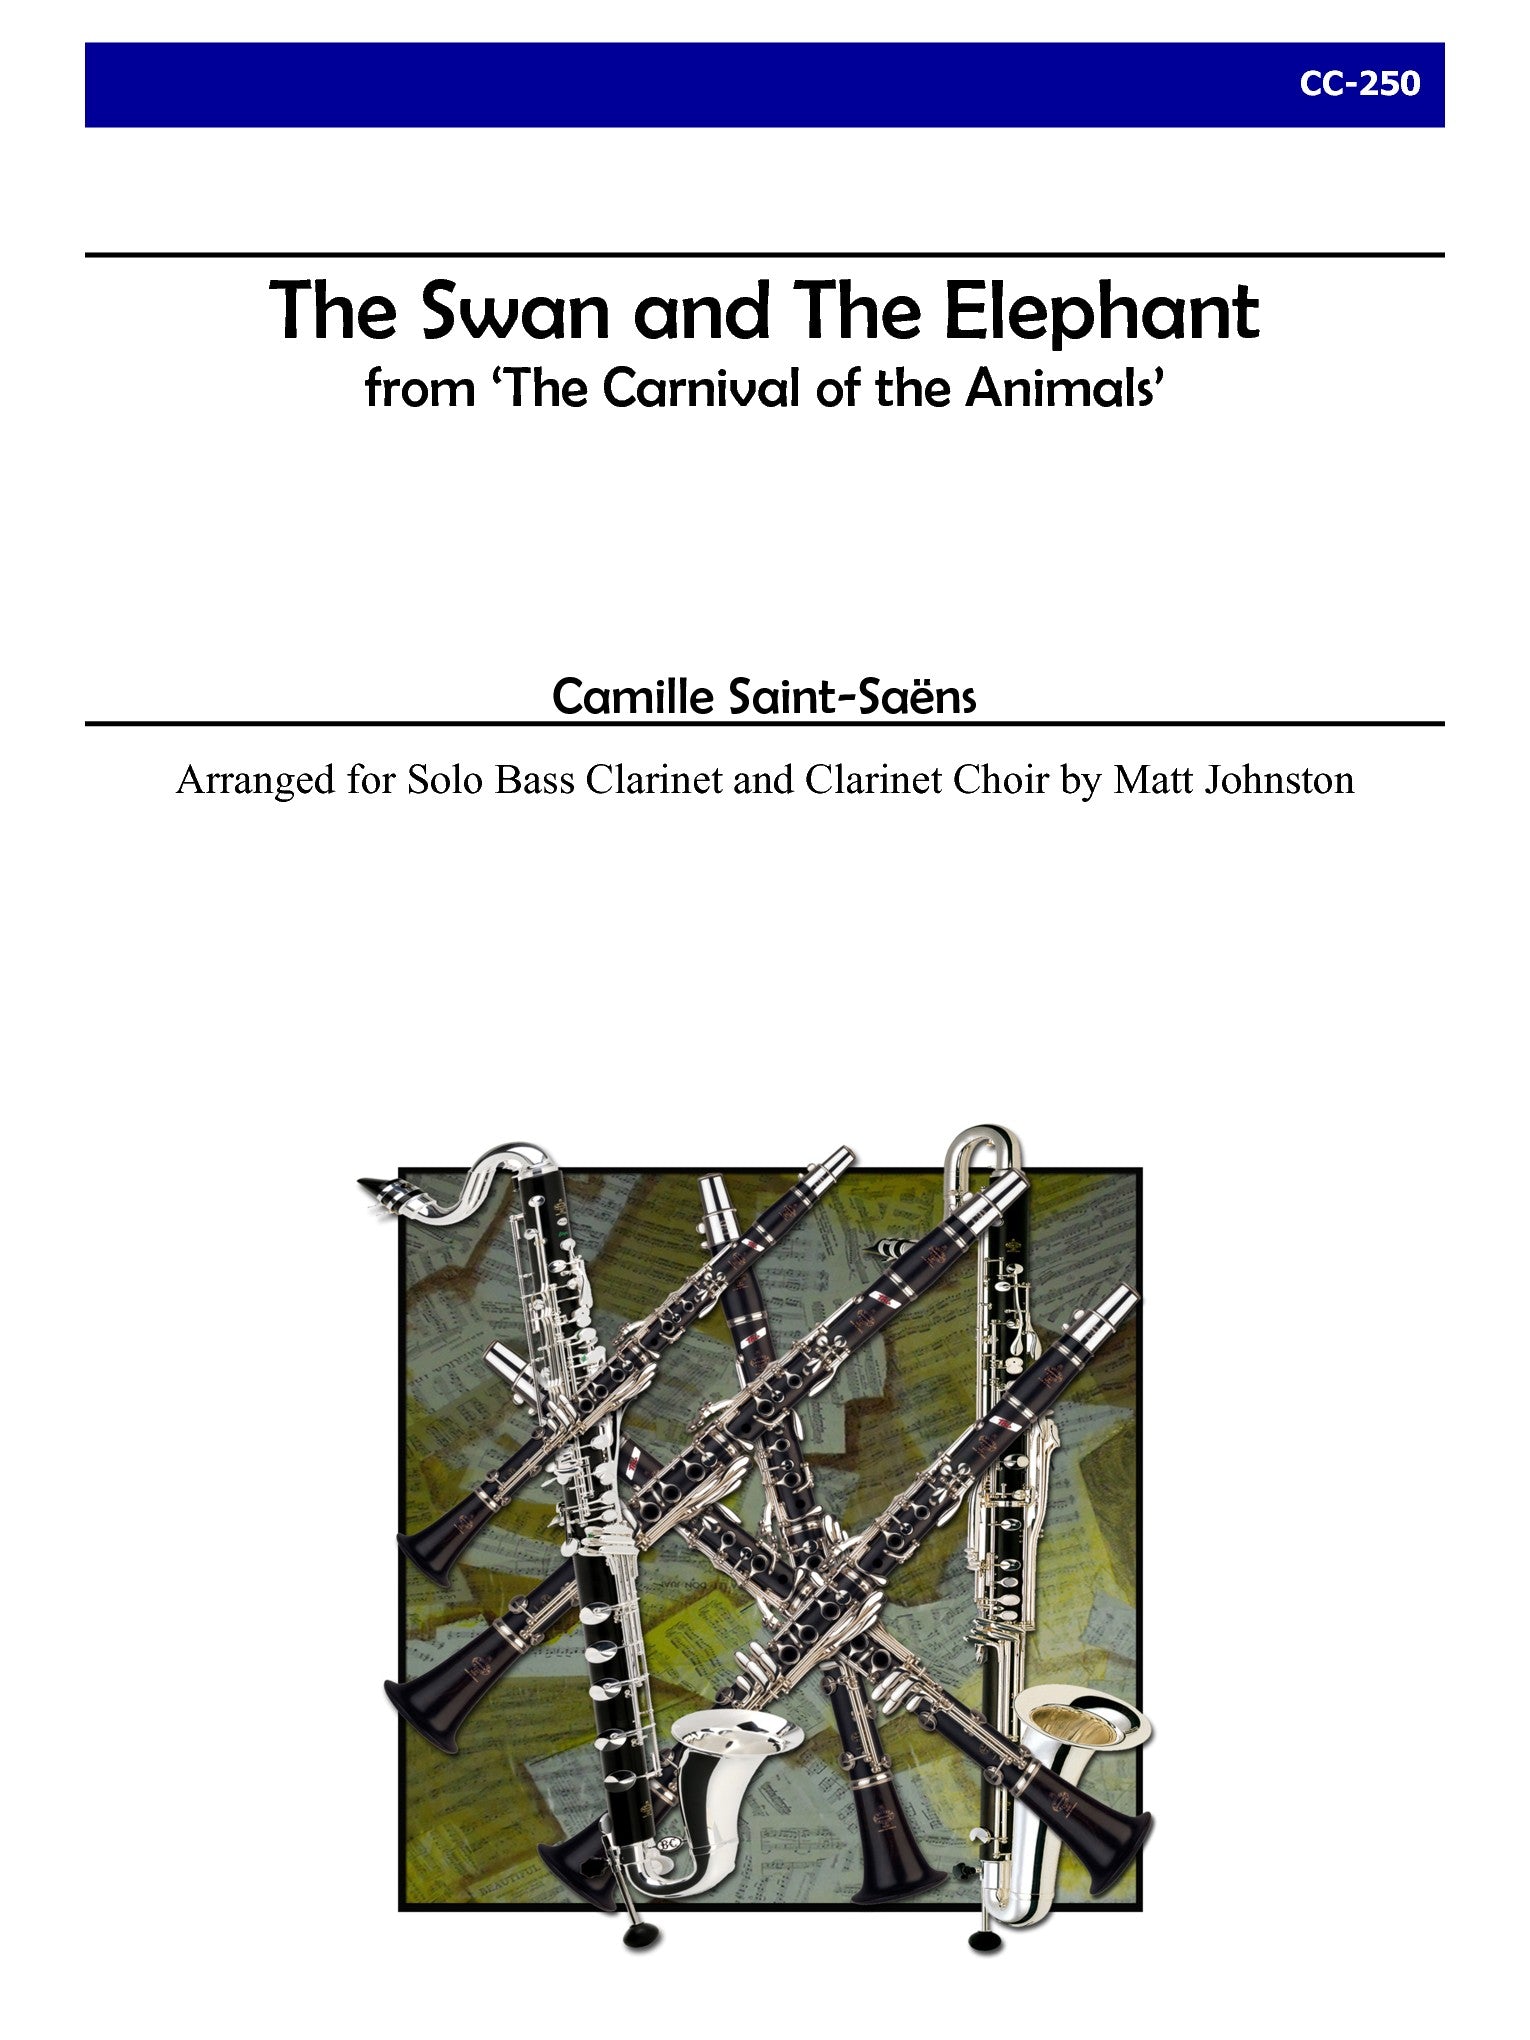 Saint-Saëns (arr. Matt Johnston) - The Swan and The Elephant from 'The Carnival of the Animals